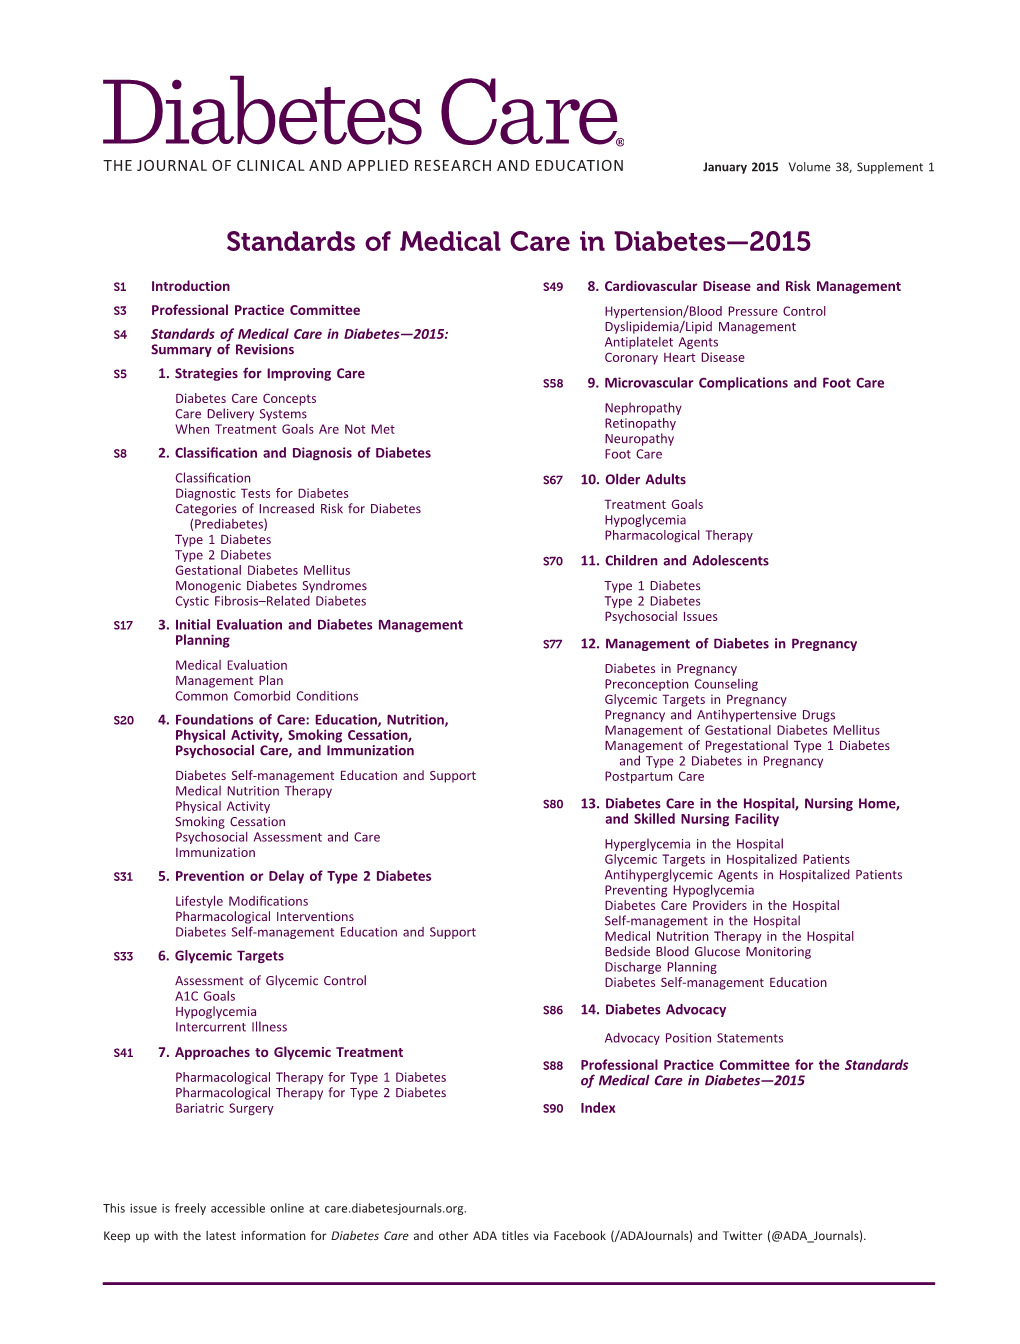 Standards of Medical Care in Diabetes—2015